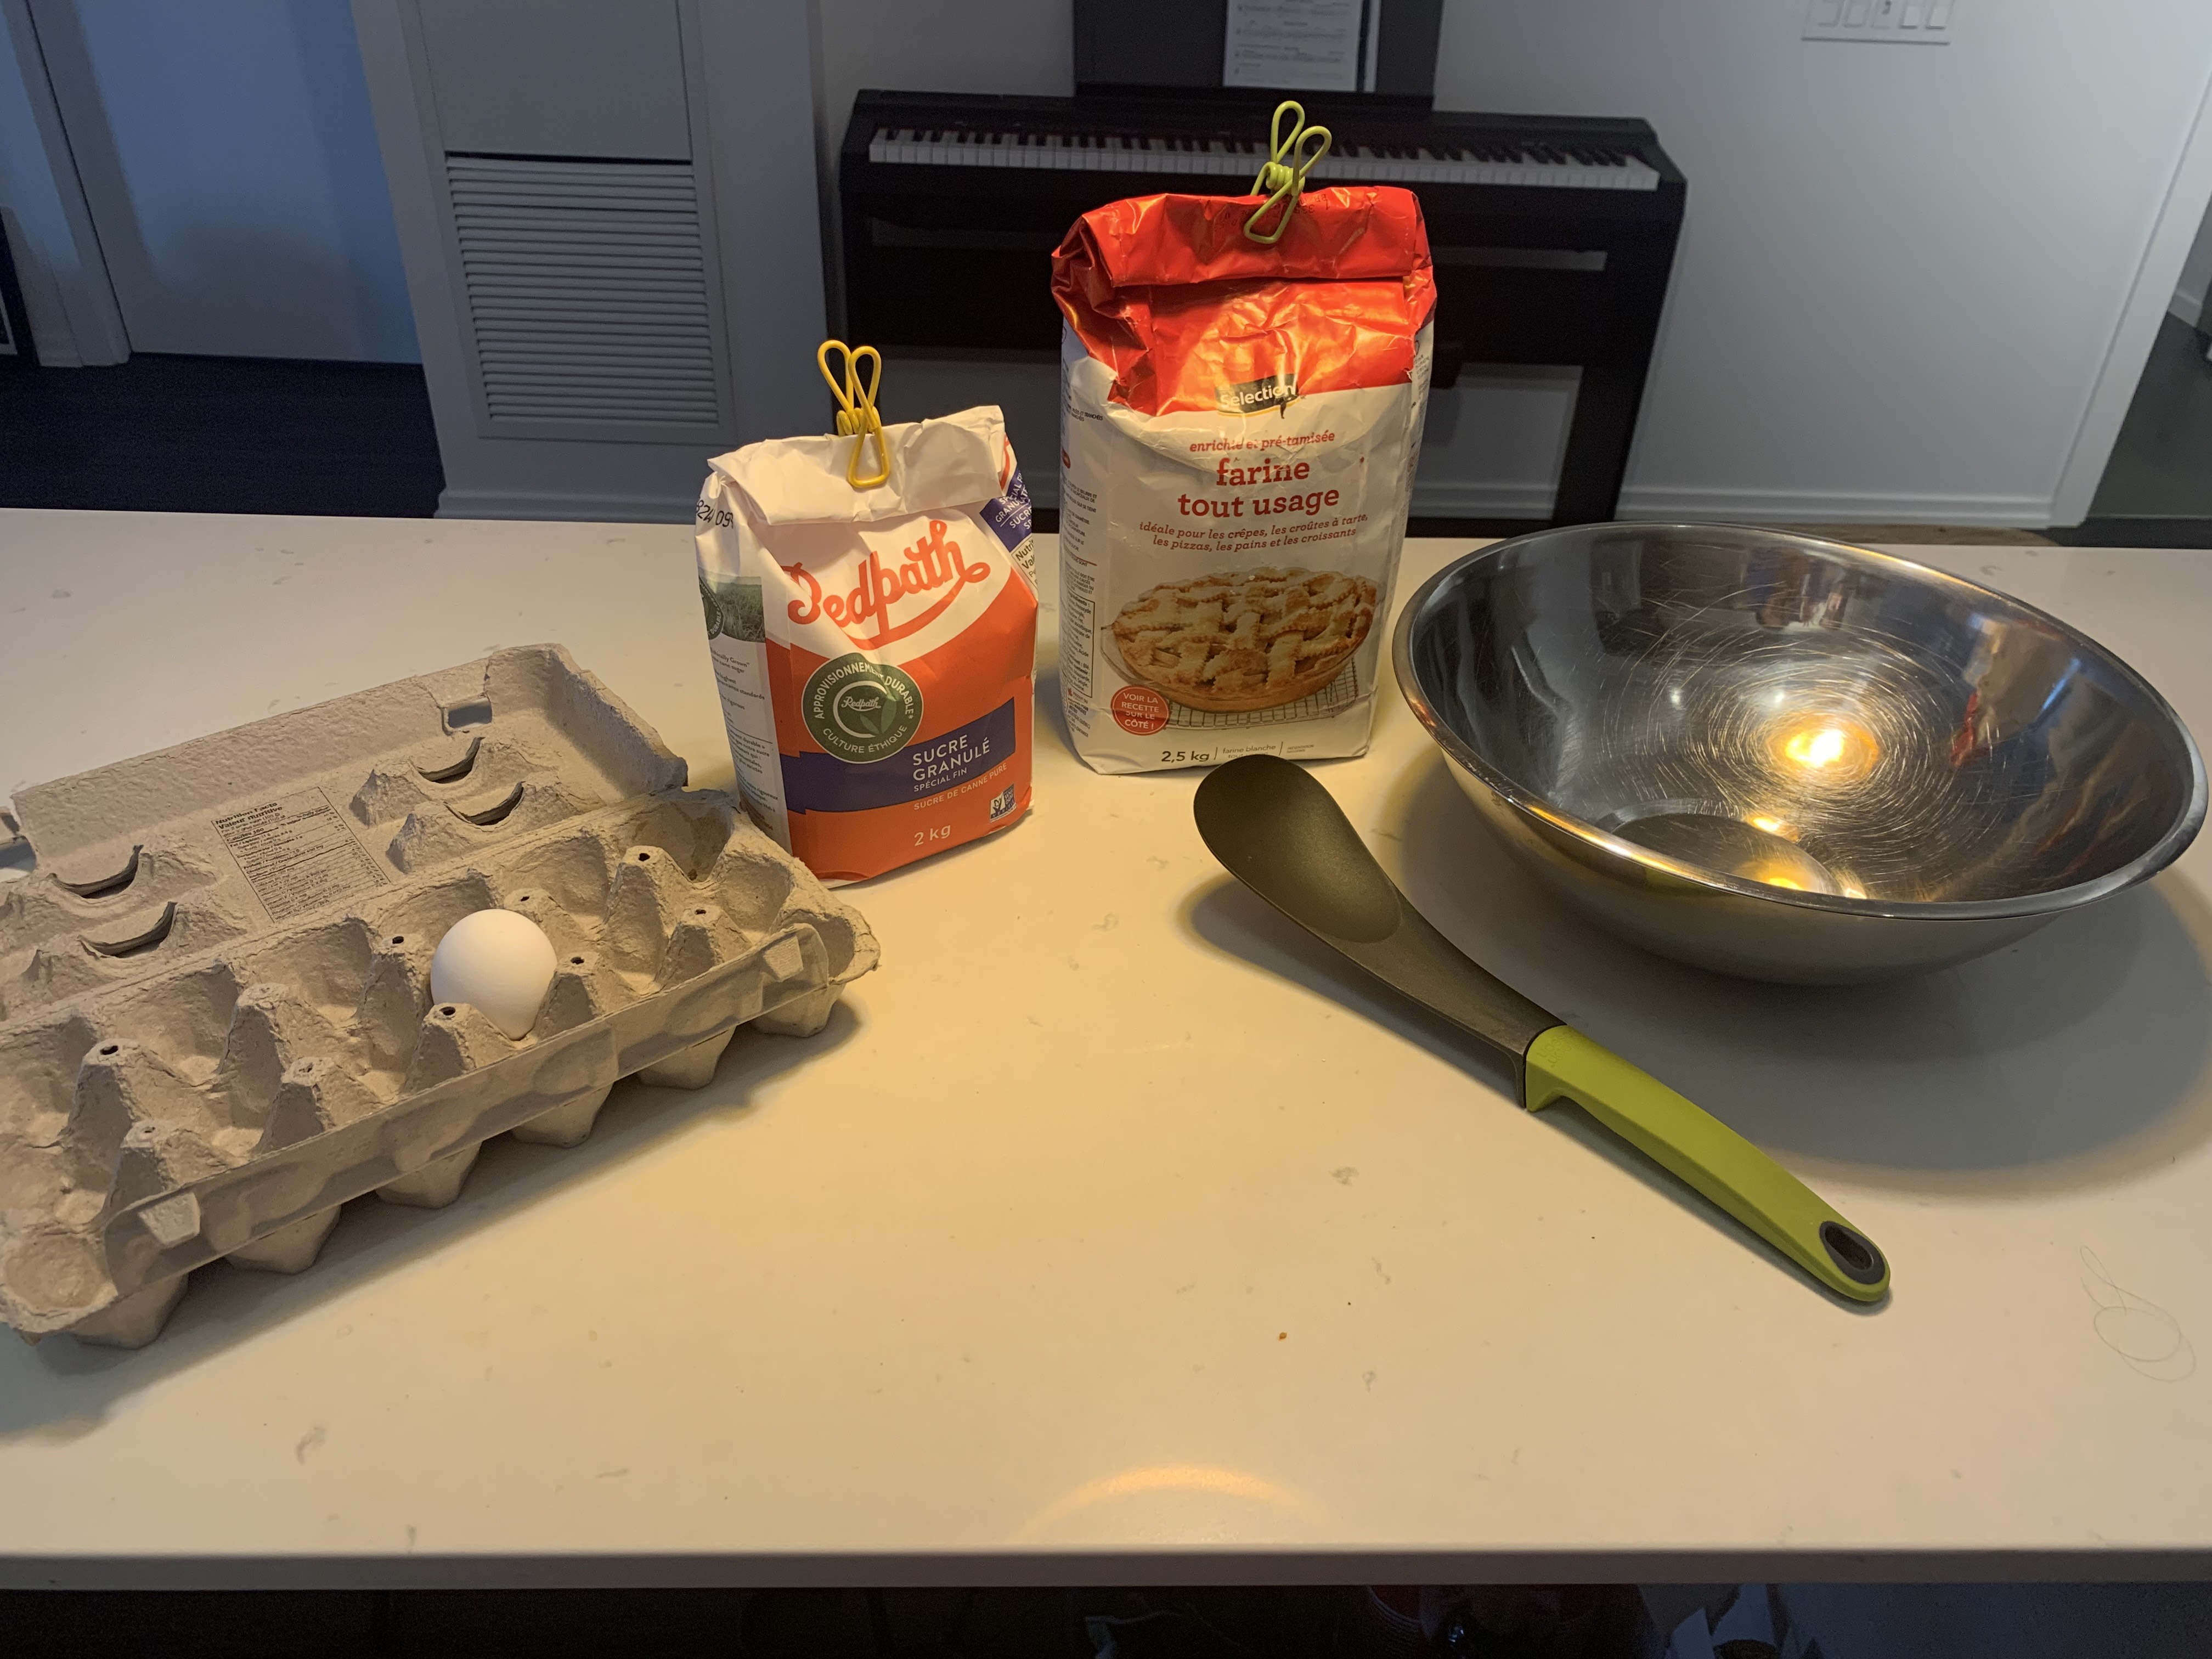 Robot: I am a robot operating in a kitchen. Given <b>img</b>, When a human asks me to do a task, I will respond with the sequence of actions I would do to accomplish the task with only the items I see.  Human: Use all of the ingredients you see to make a cake batter. [sep]1. crack egg. 2. put egg in bowl. 3. put flour in bowl. 4. put sugar in bowl. 5. mix. 6. put in pan. 7. bake. 8. eat. 9. clean up.